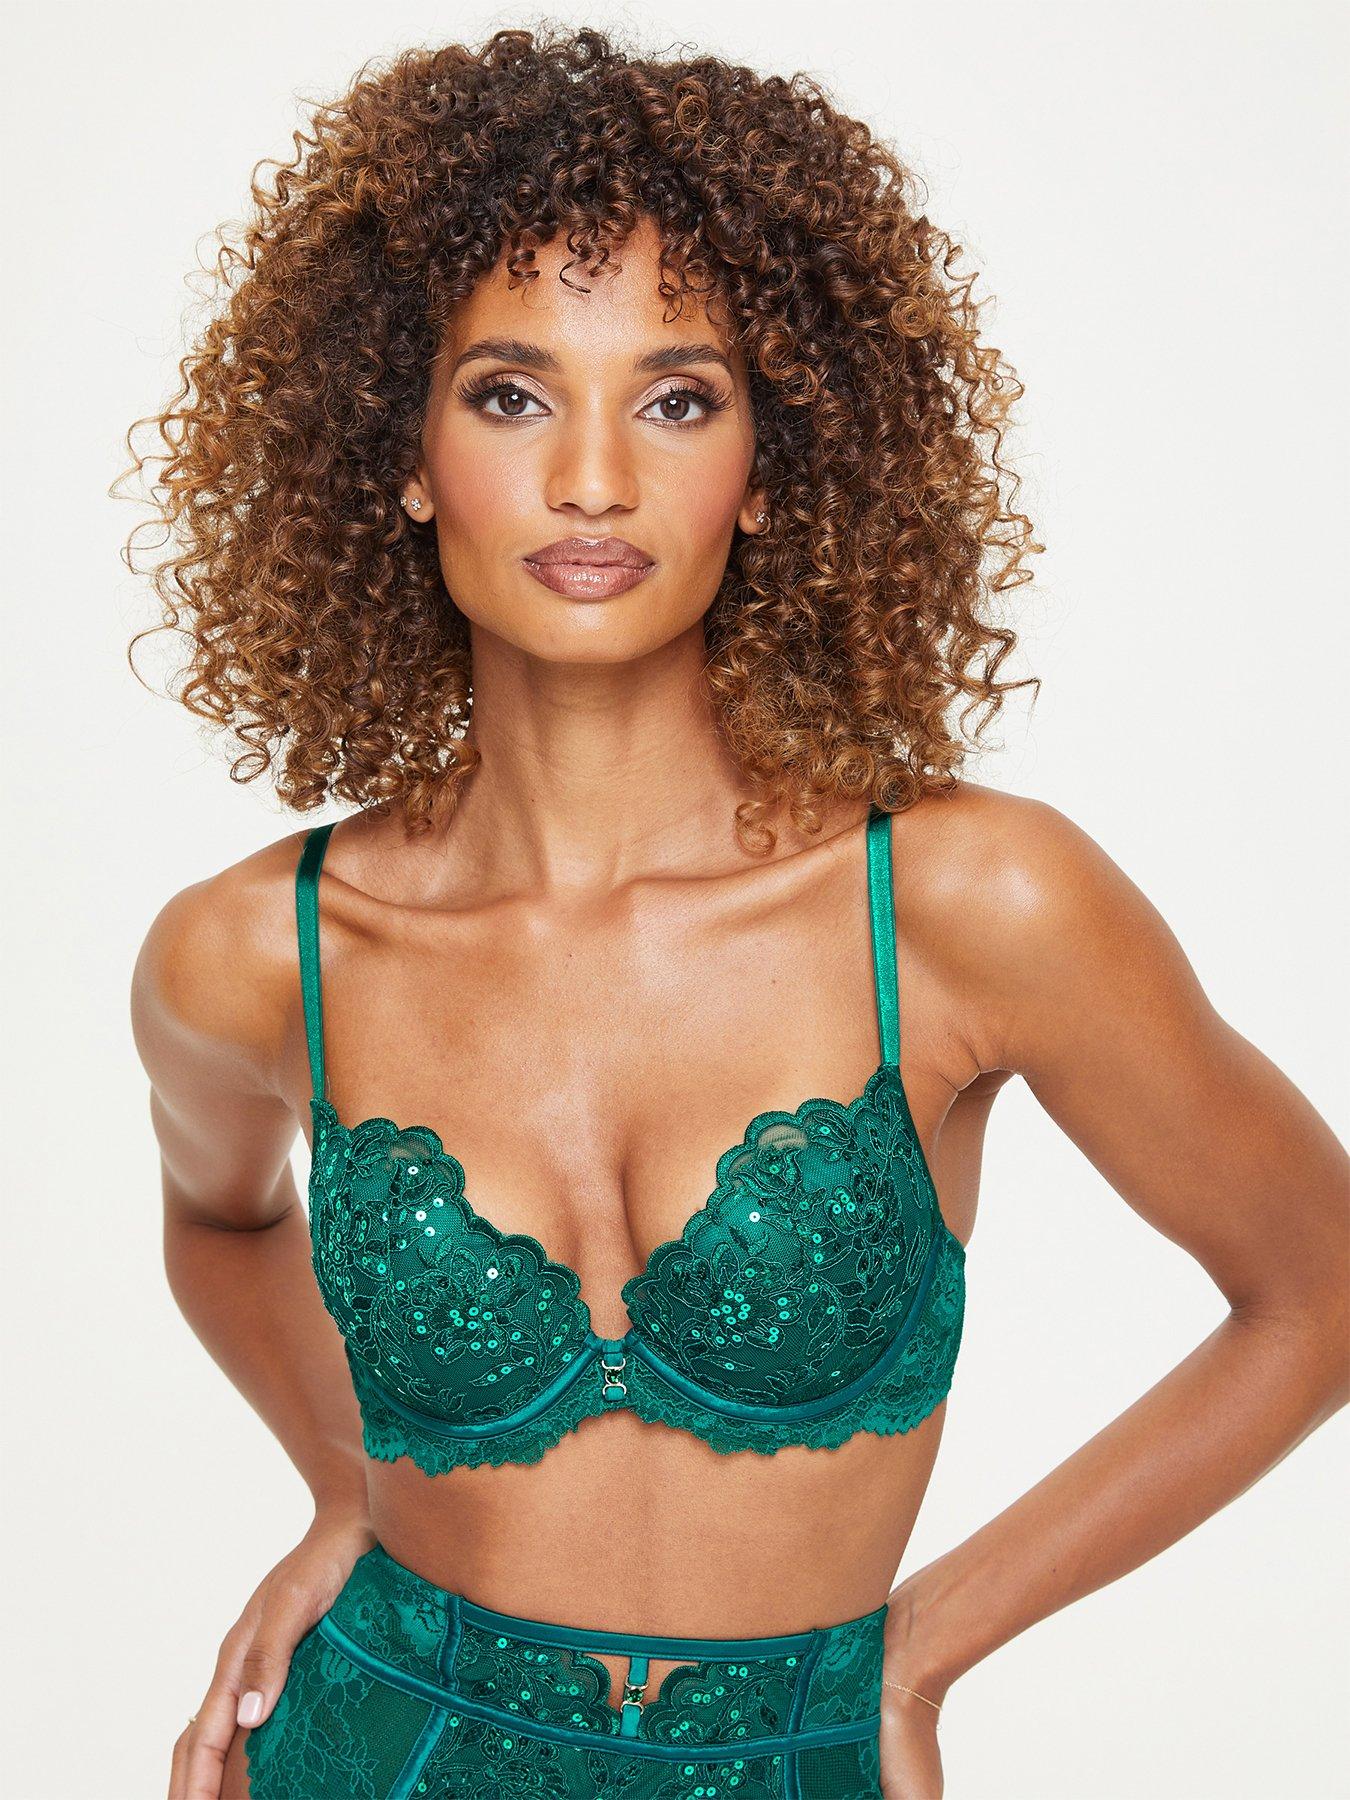 The Icon Padded Plunge Bra